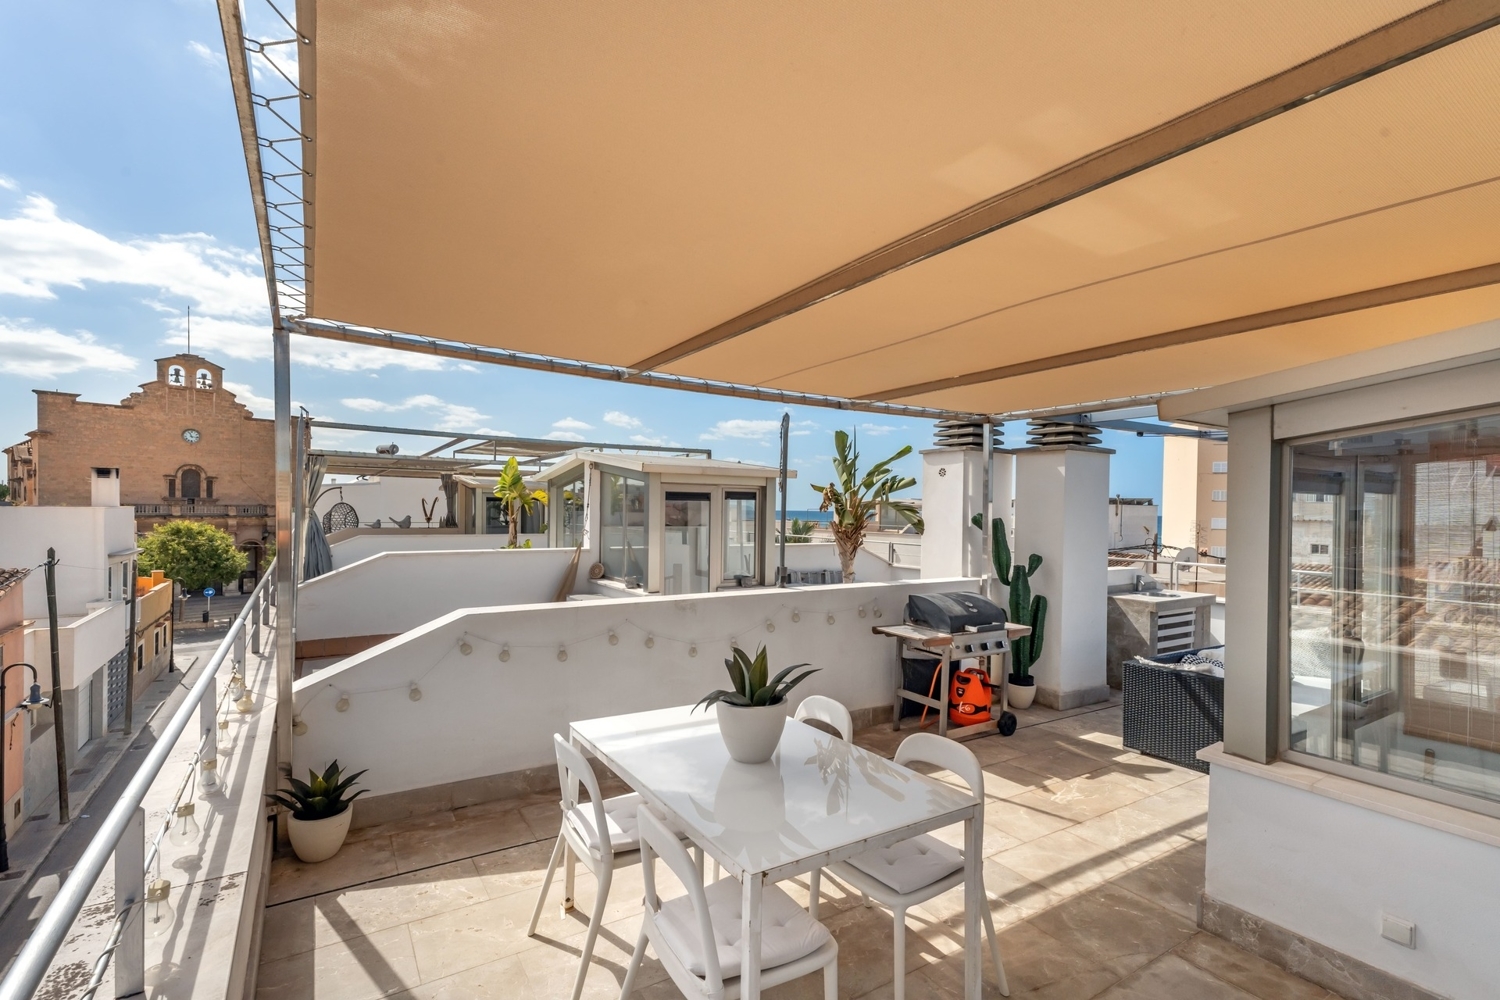 Townhouse in Portixol with roof terrace, pool and parking